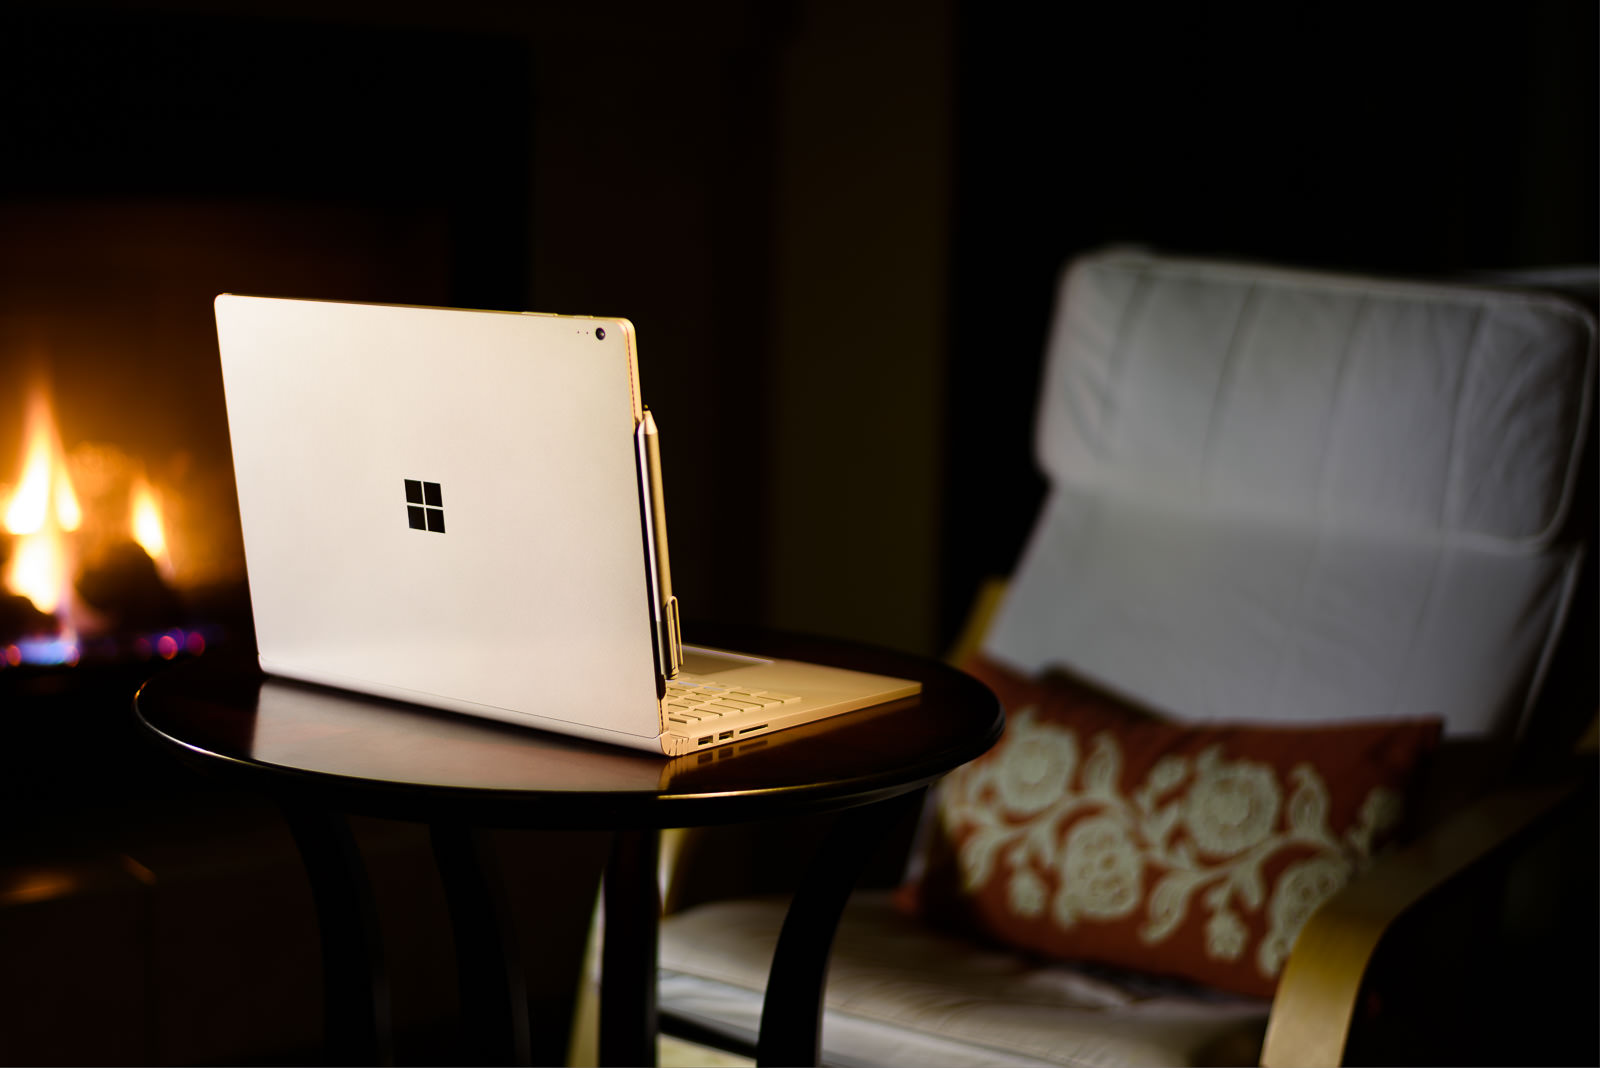 surface book for photot editing